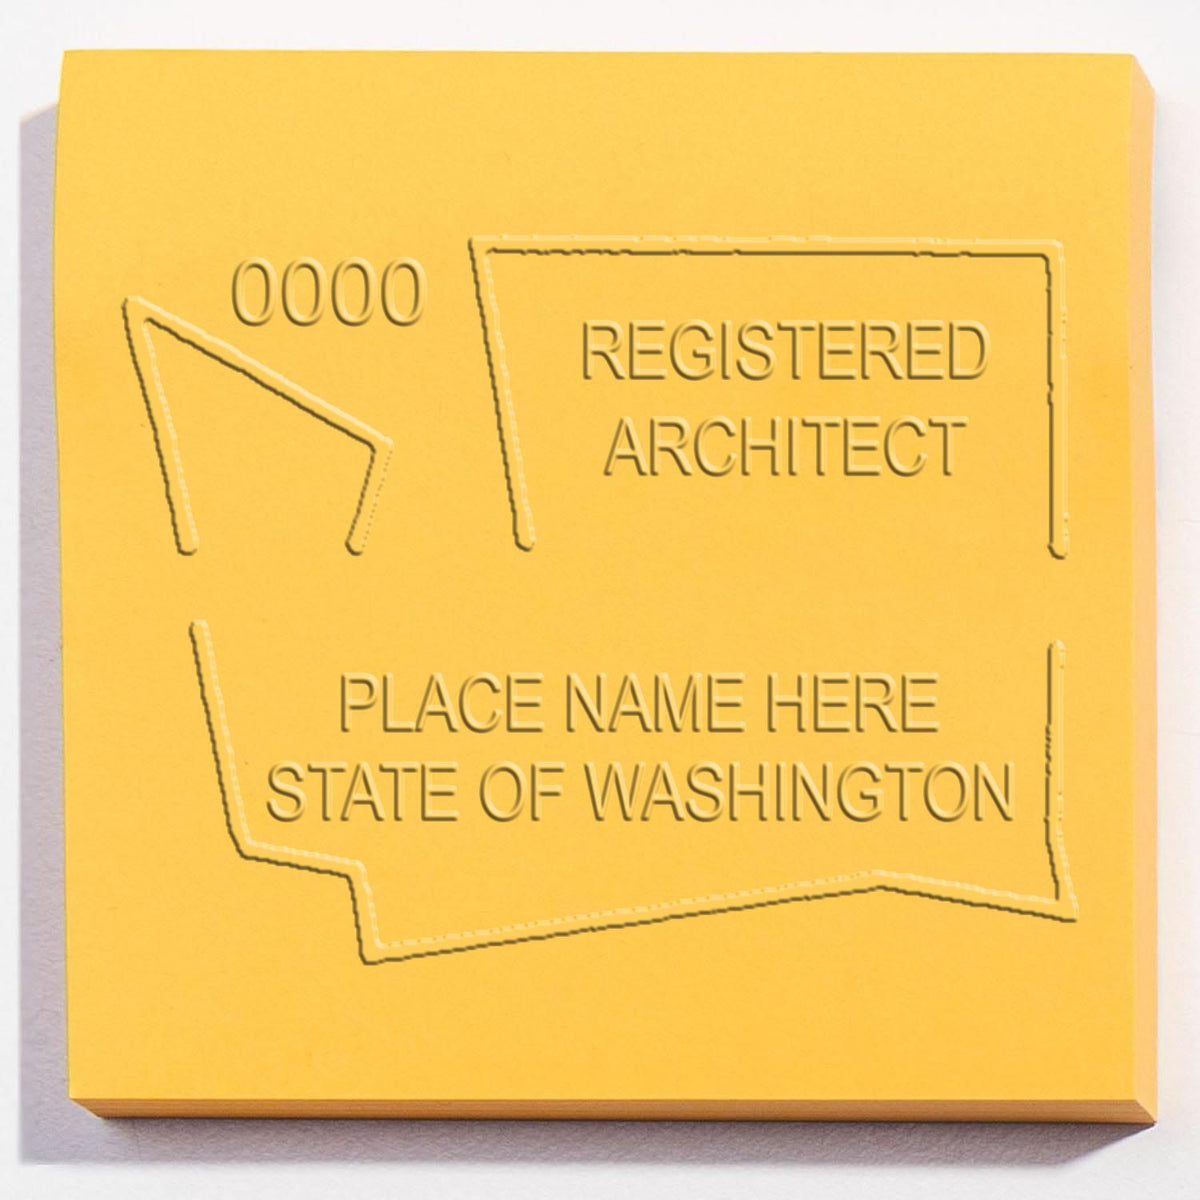 A stamped imprint of the Gift Washington Architect Seal in this stylish lifestyle photo, setting the tone for a unique and personalized product.